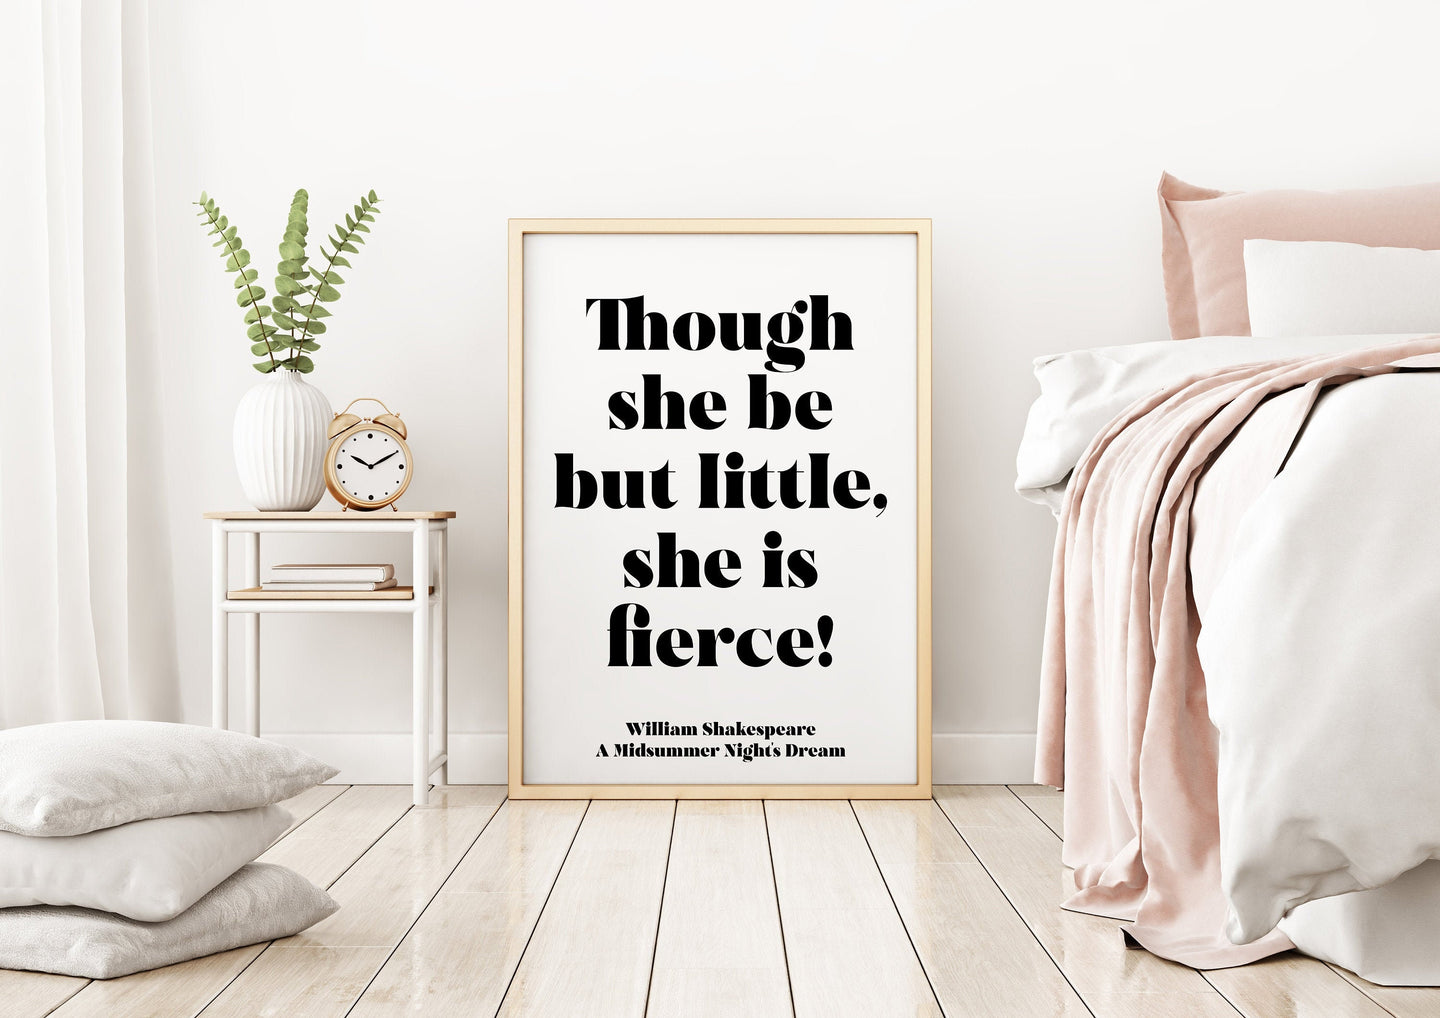 Shakespeare Quote - Though she be but little, she is fierce! - A Midsummer Night's Dream - baby girl nursery decor - Girl's bedroom